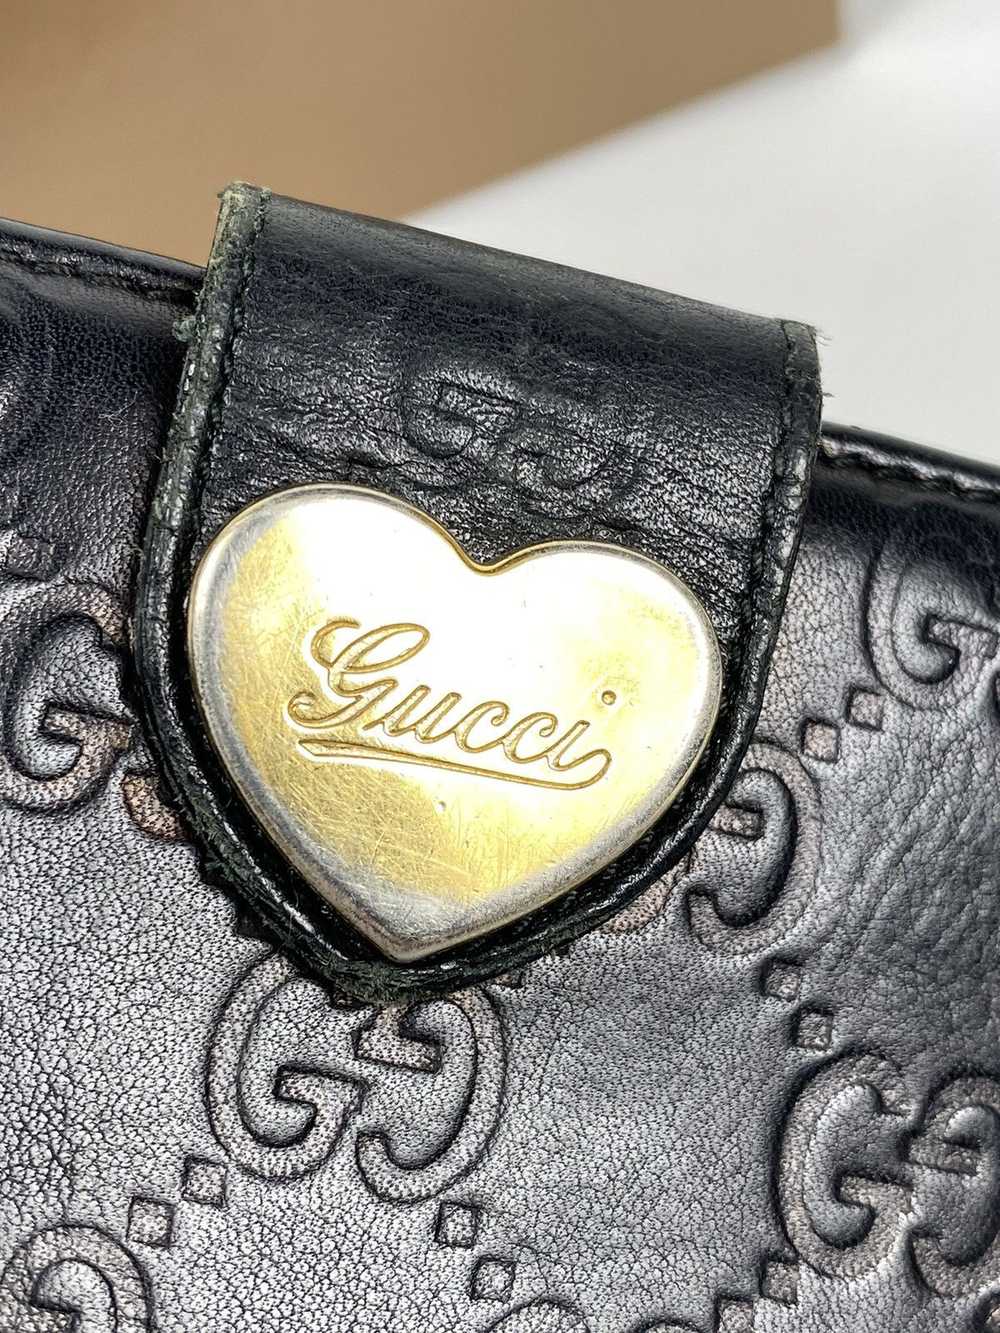 Gucci Gucci GG Guccissima leather long wallet - image 4